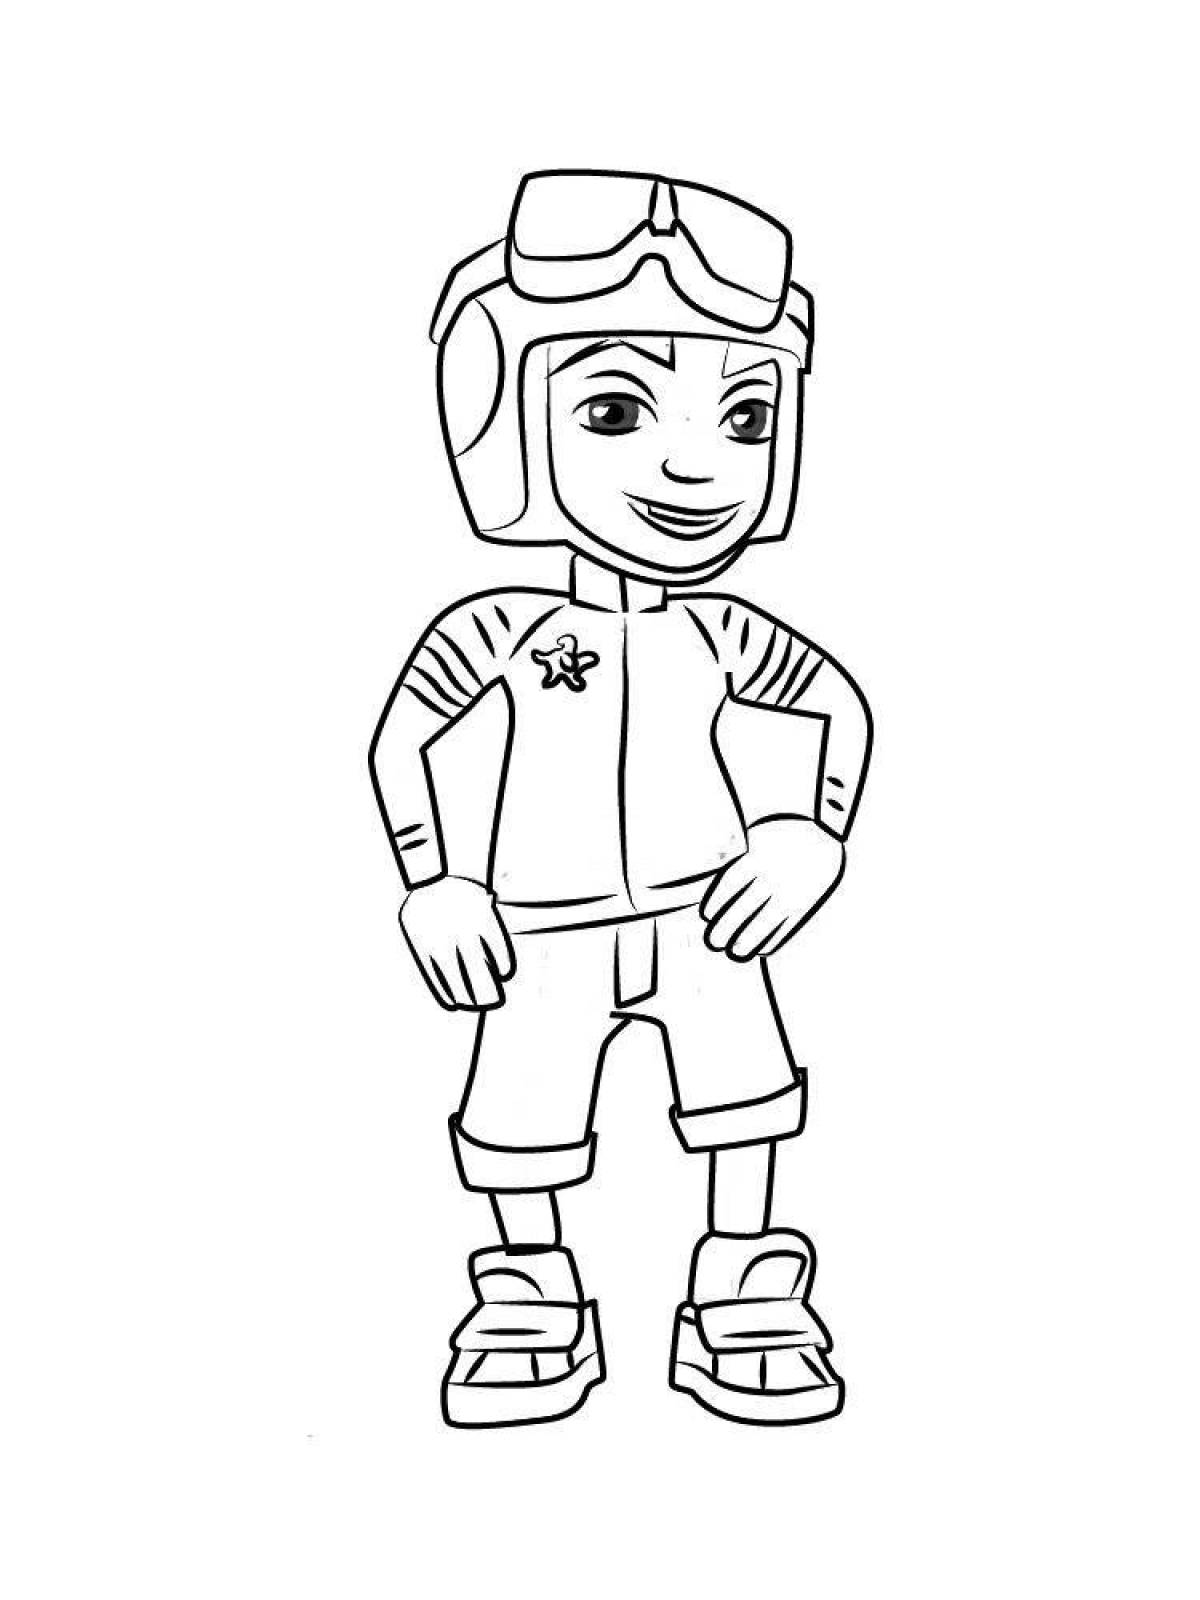 Subway surfers coloring book